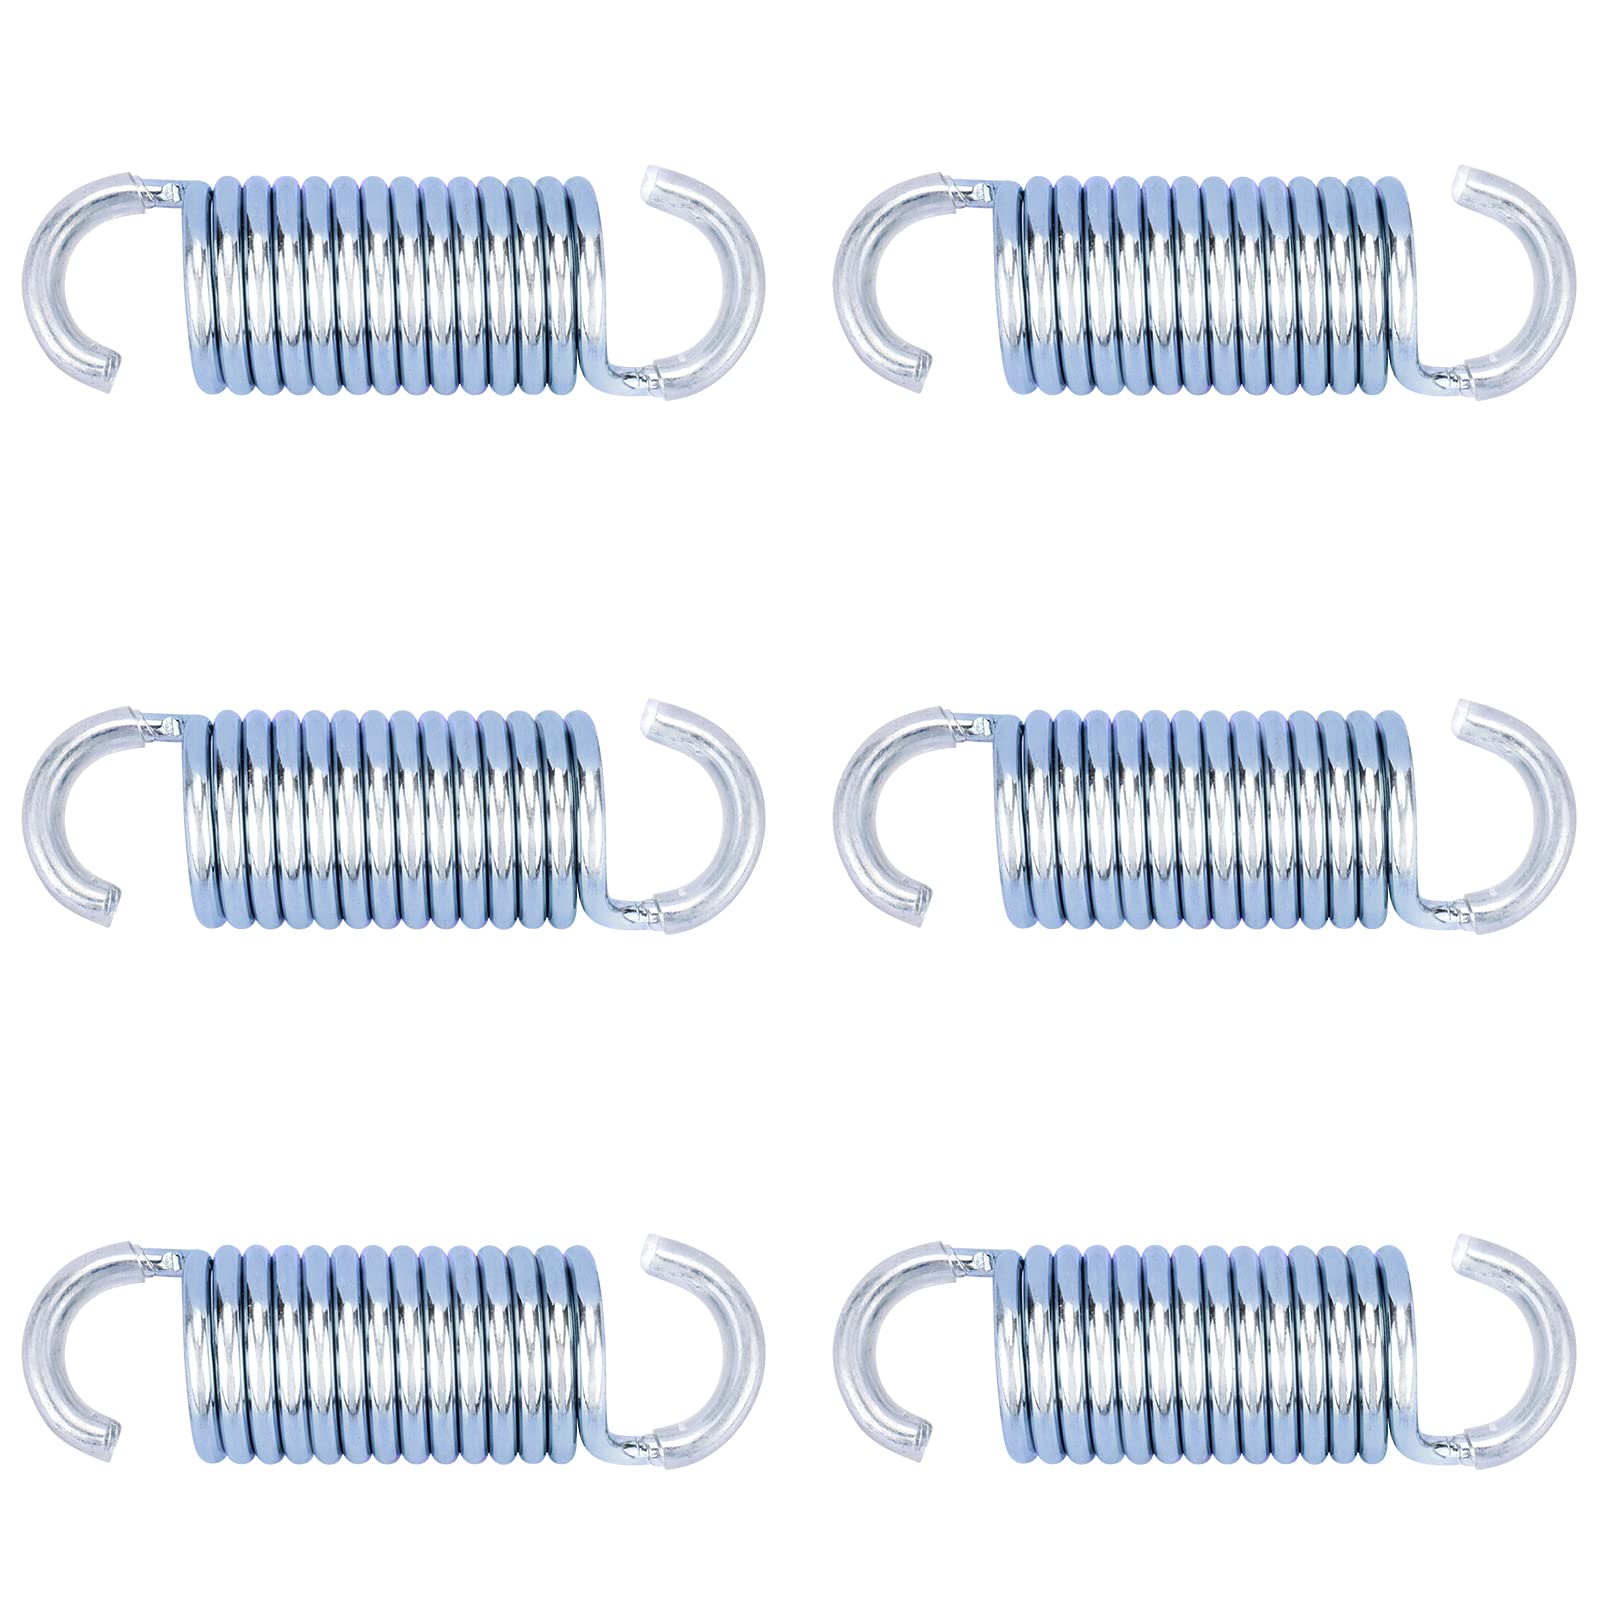 JIALIA GUPO 2-1/4inch(6Pcs) Protective Coated Replacement Furniture Tension Springs for Recliner Sofa Bed, Metallic, (TH-2-!/4(2.5))